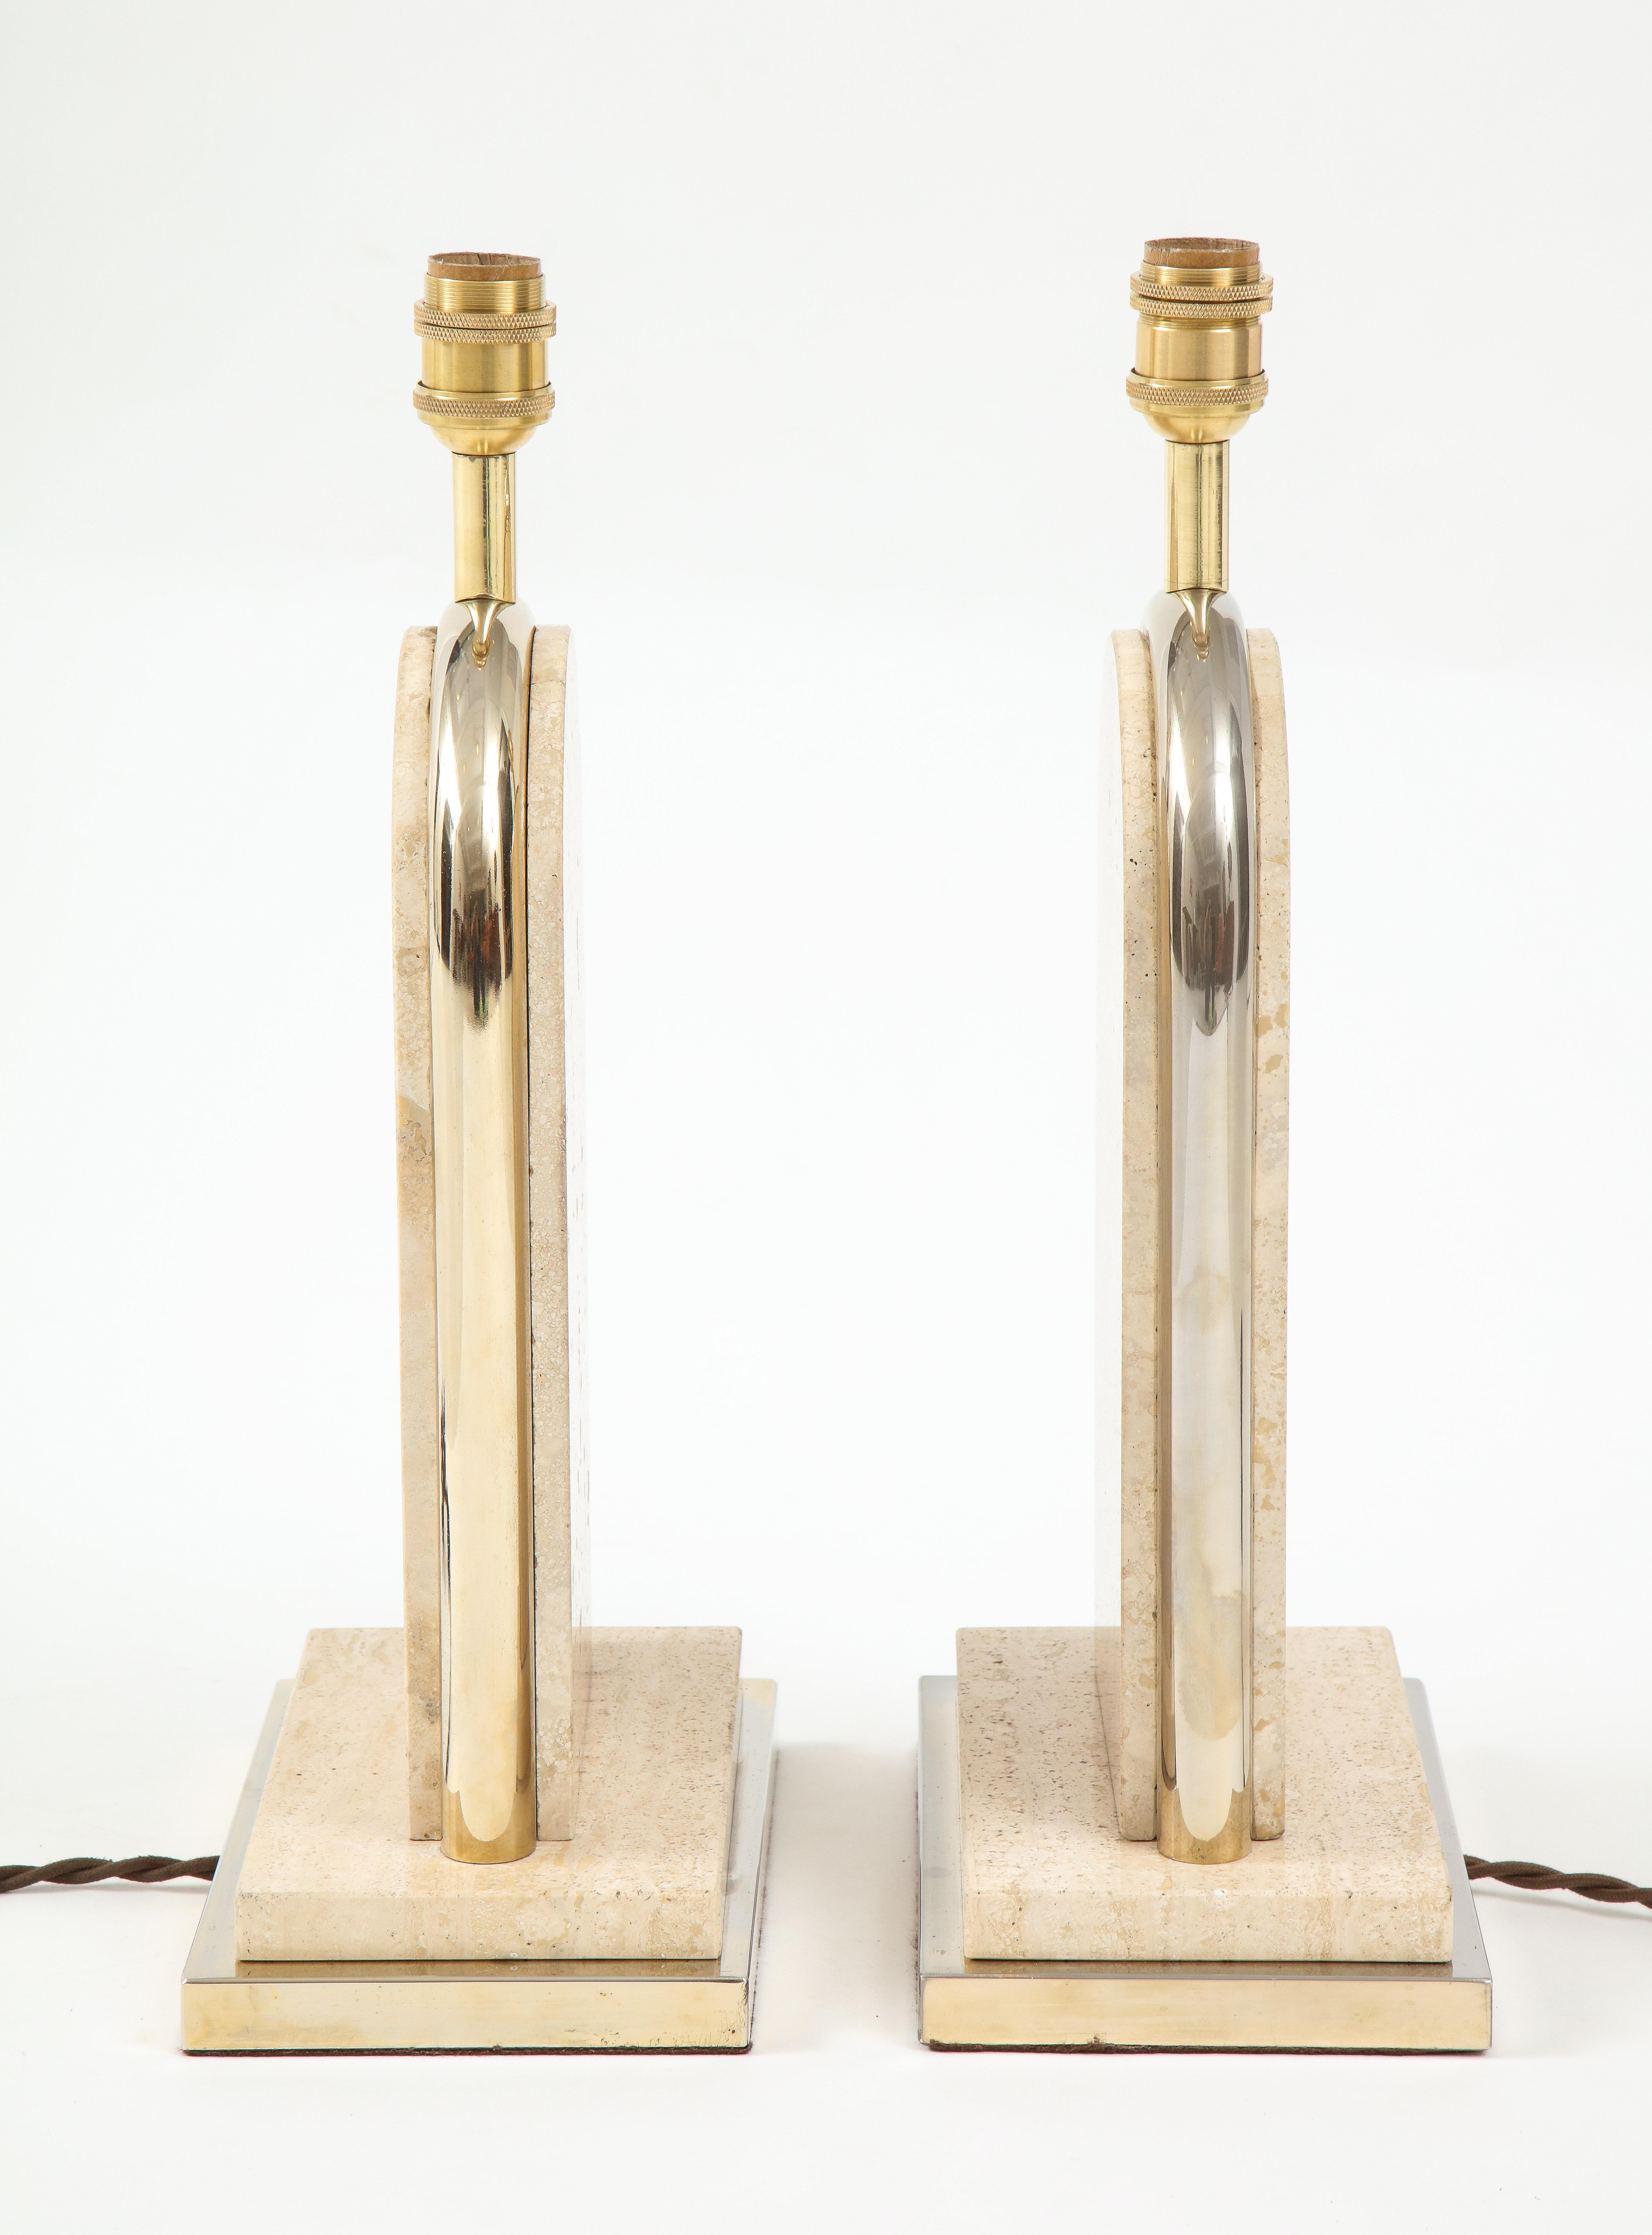 Pair of Belgian Beige Travertine and Gilt Metal Table Lamps, Belgium 1970's For Sale 3